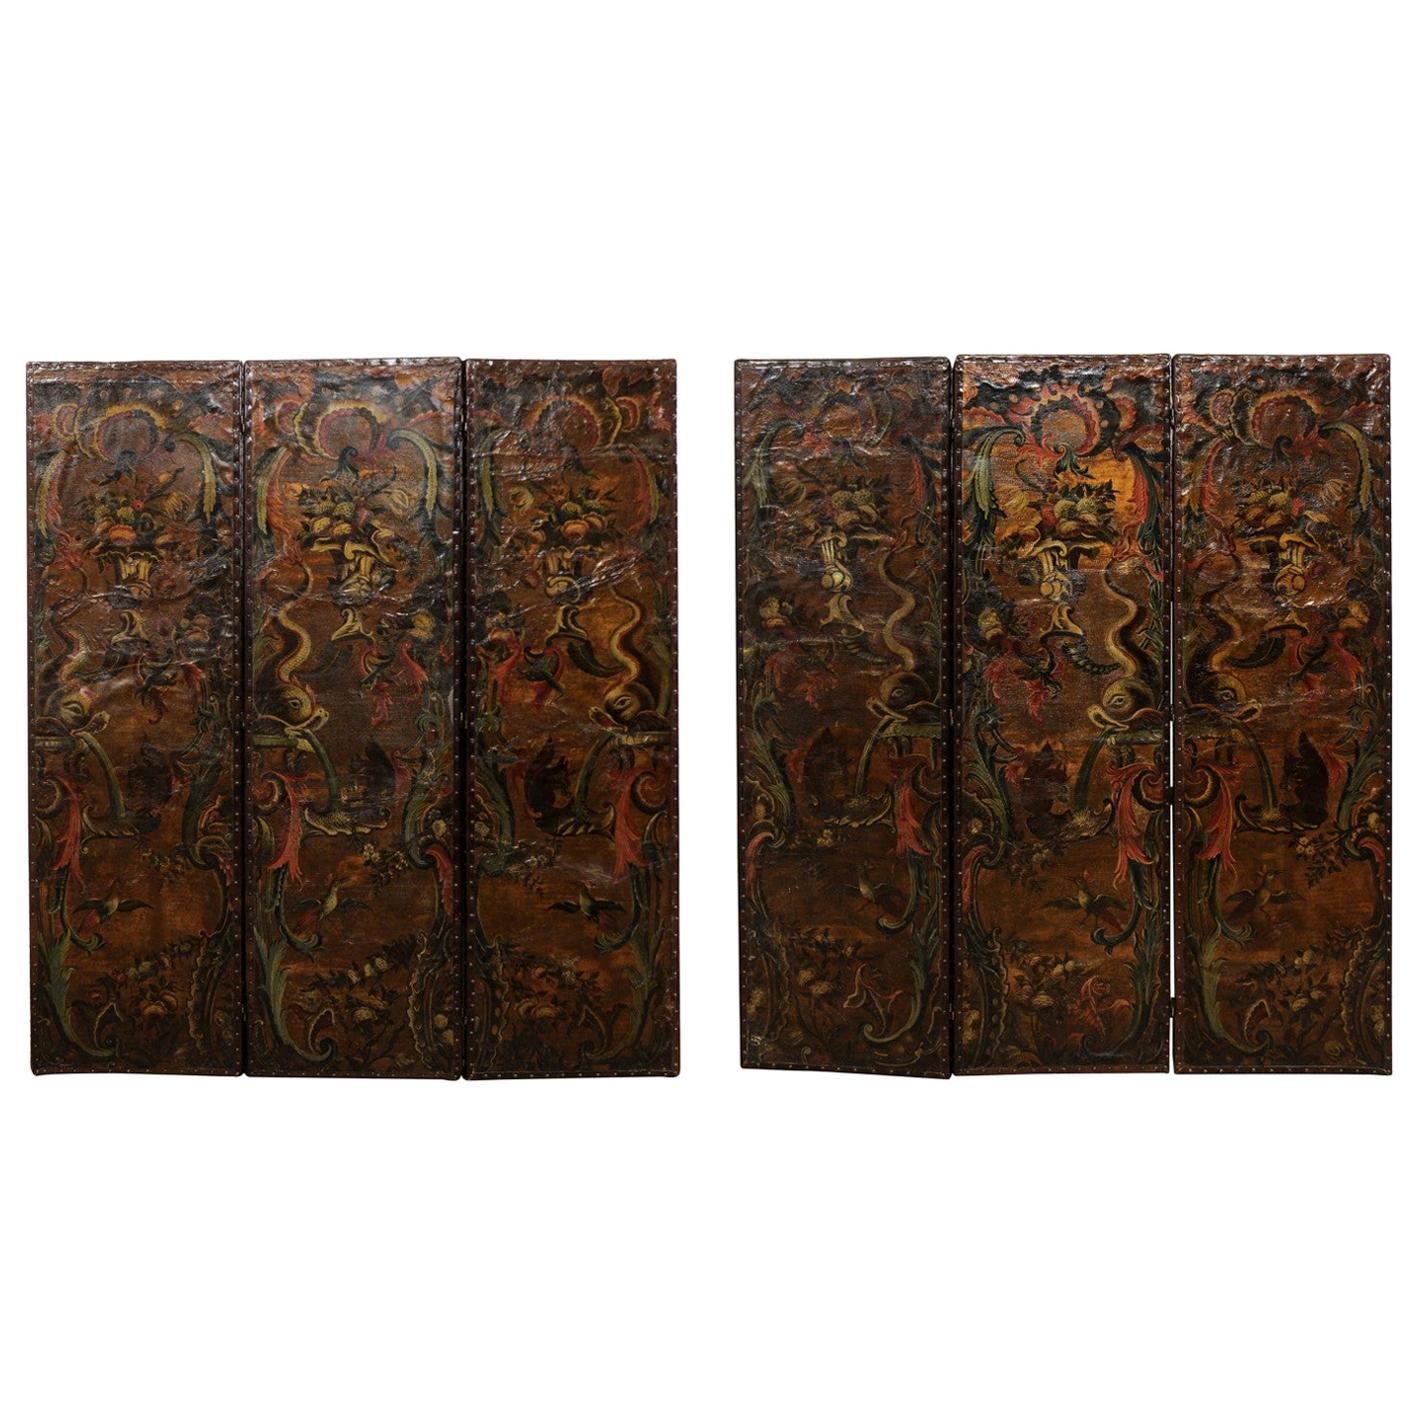 Italian Pair of Leather Embossed Room Dividers, Turn of the 17th & 18th Century